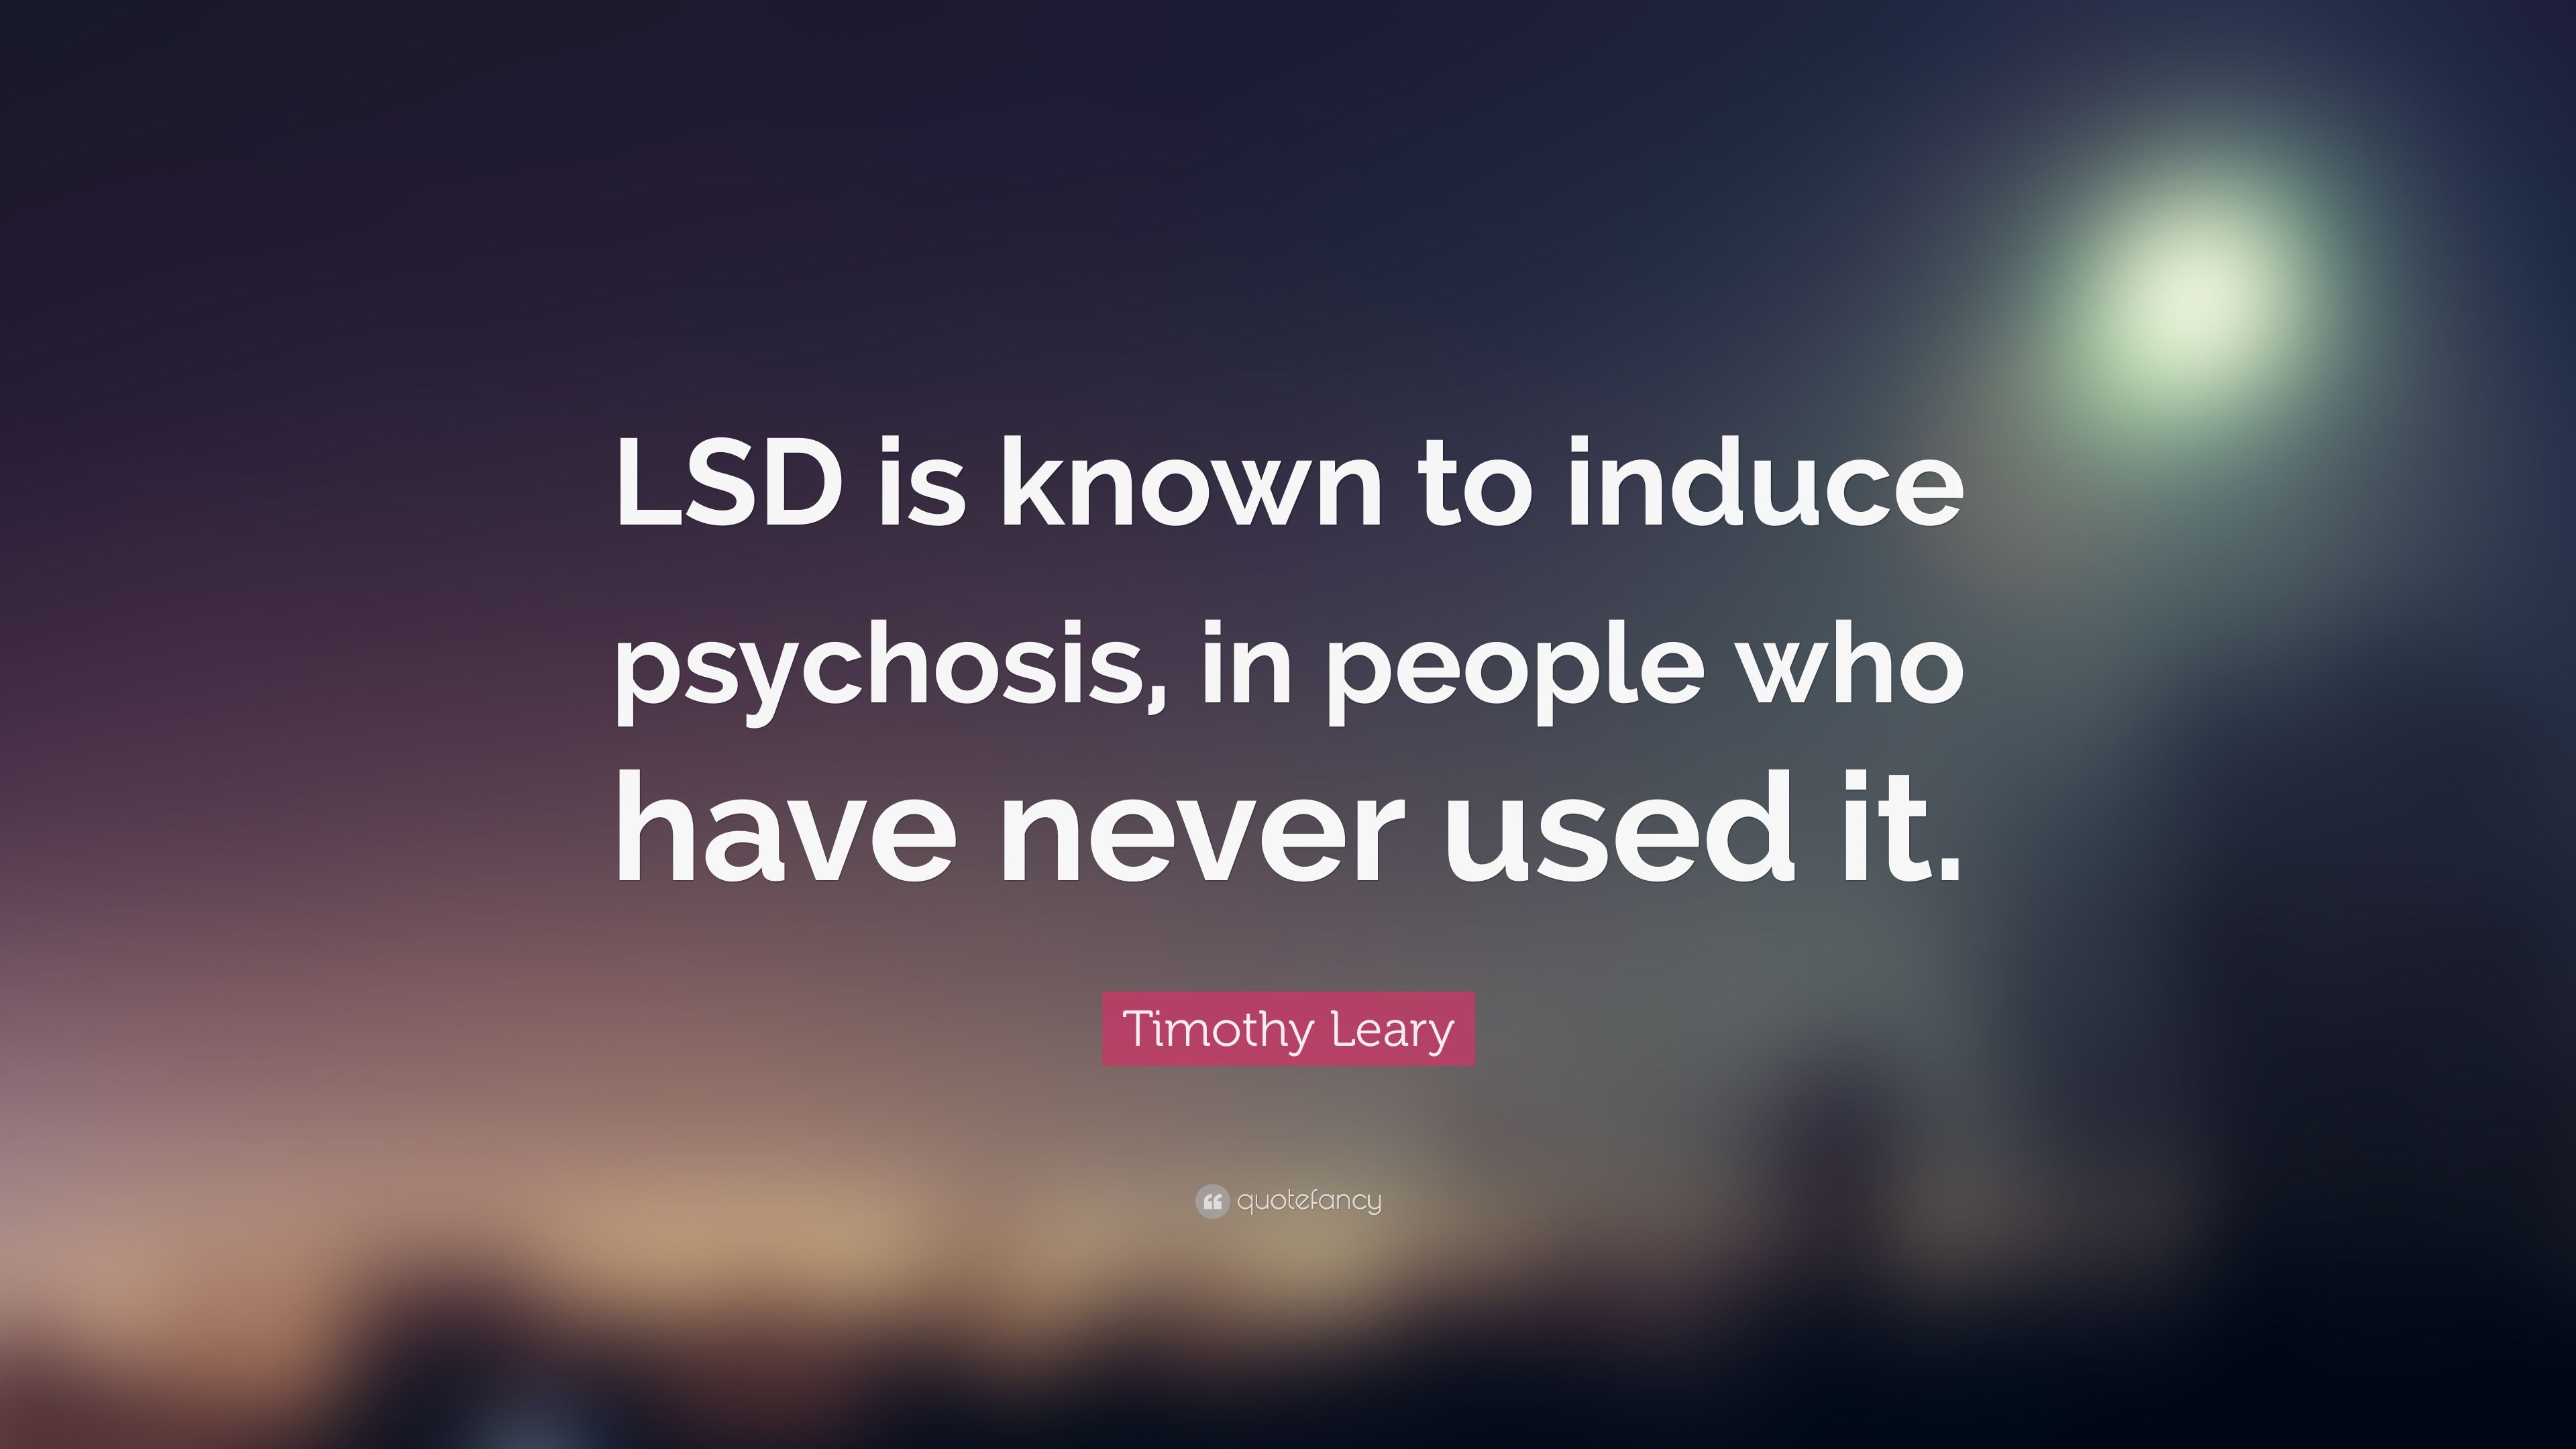 Timothy Leary Quote: “LSD is known to induce psychosis, in people